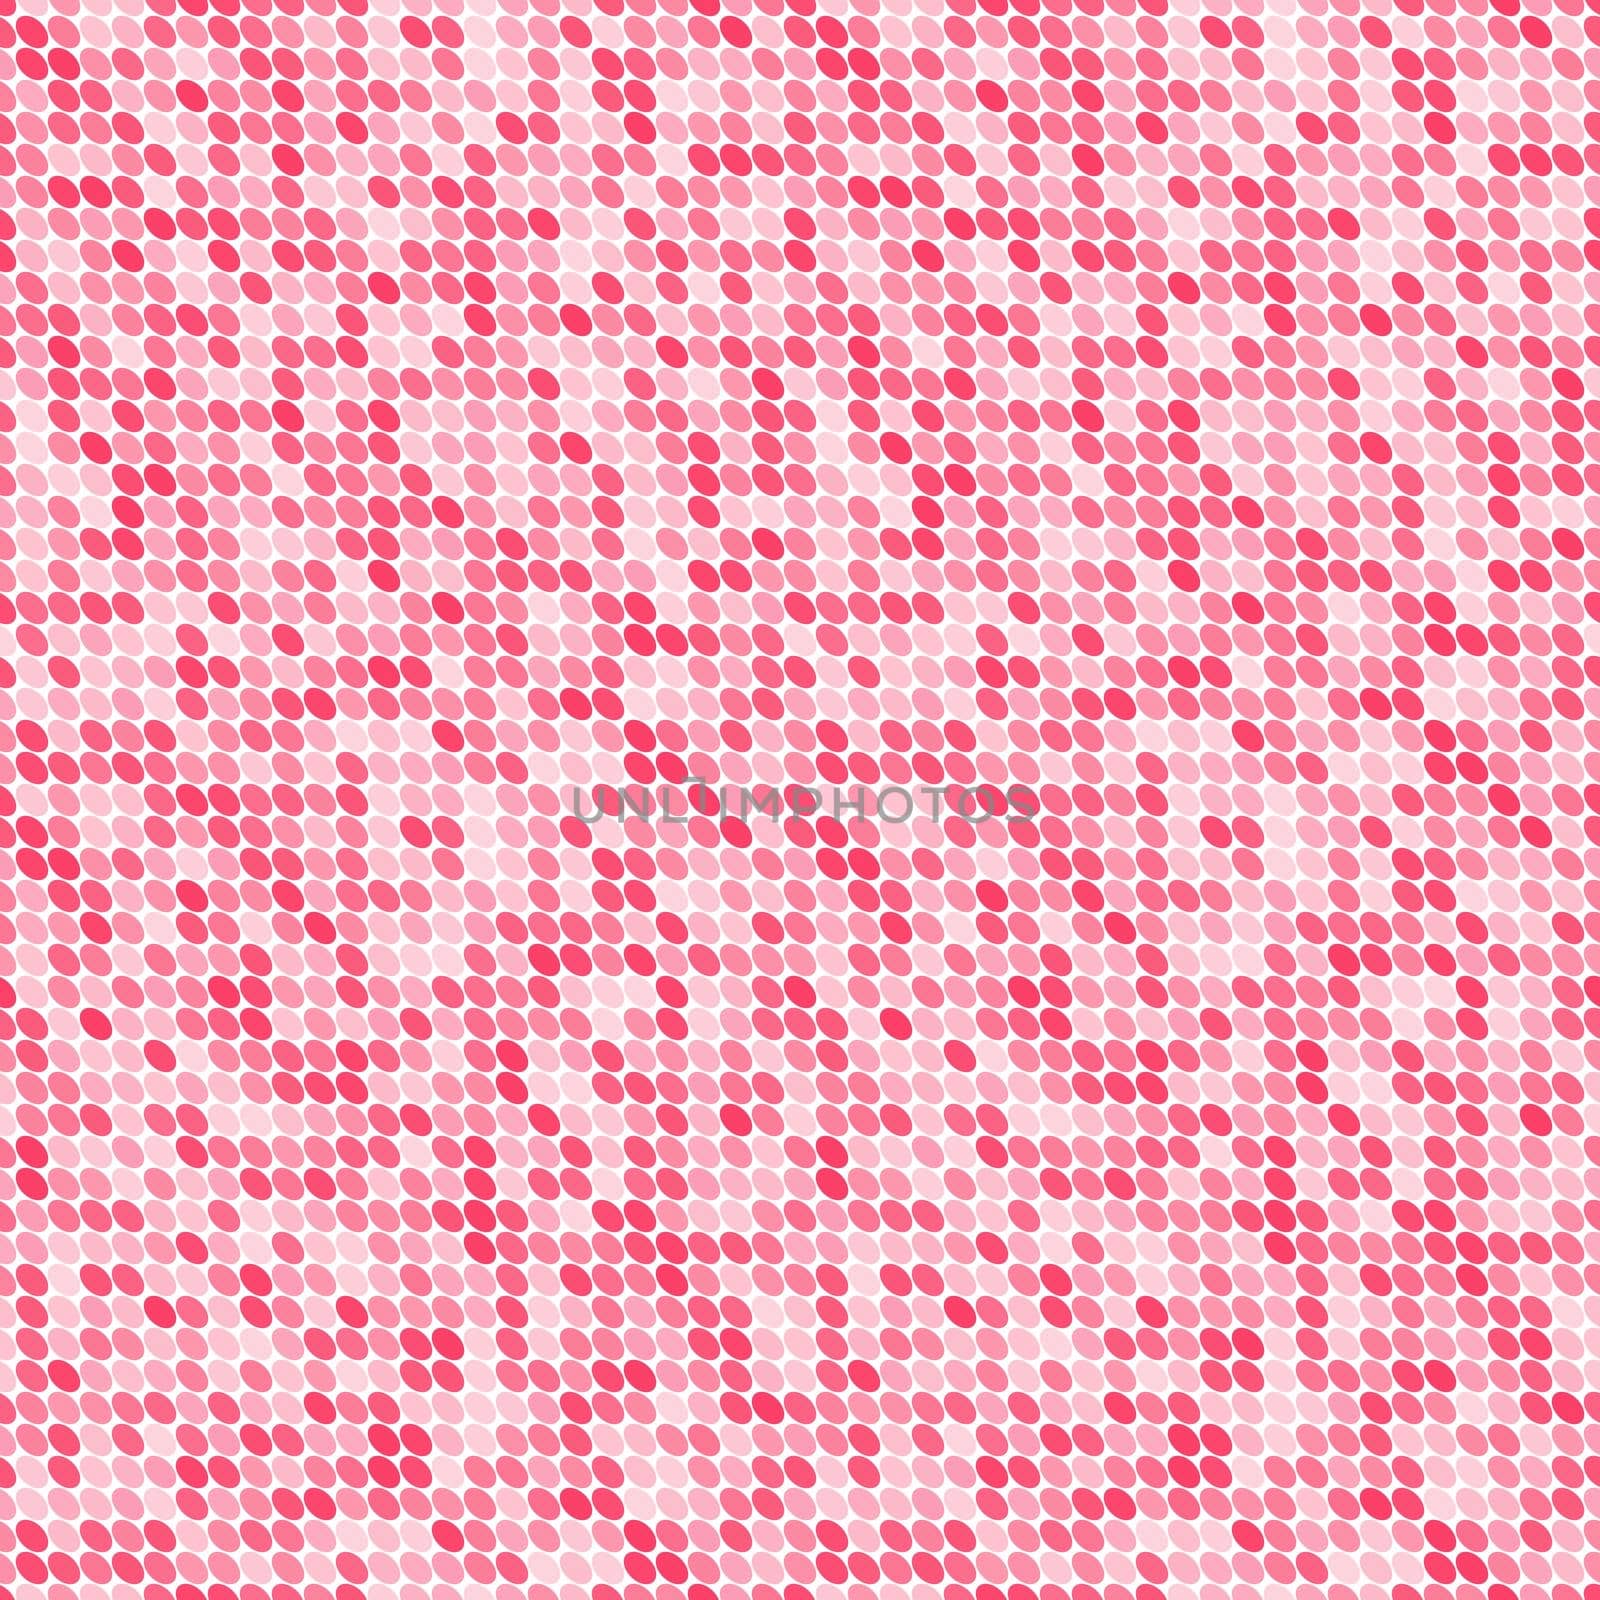 Abstract fashion polka dots background. White seamless pattern with pink gradient circles. Template design for invitation, poster, card, flyer, banner, textile, fabric